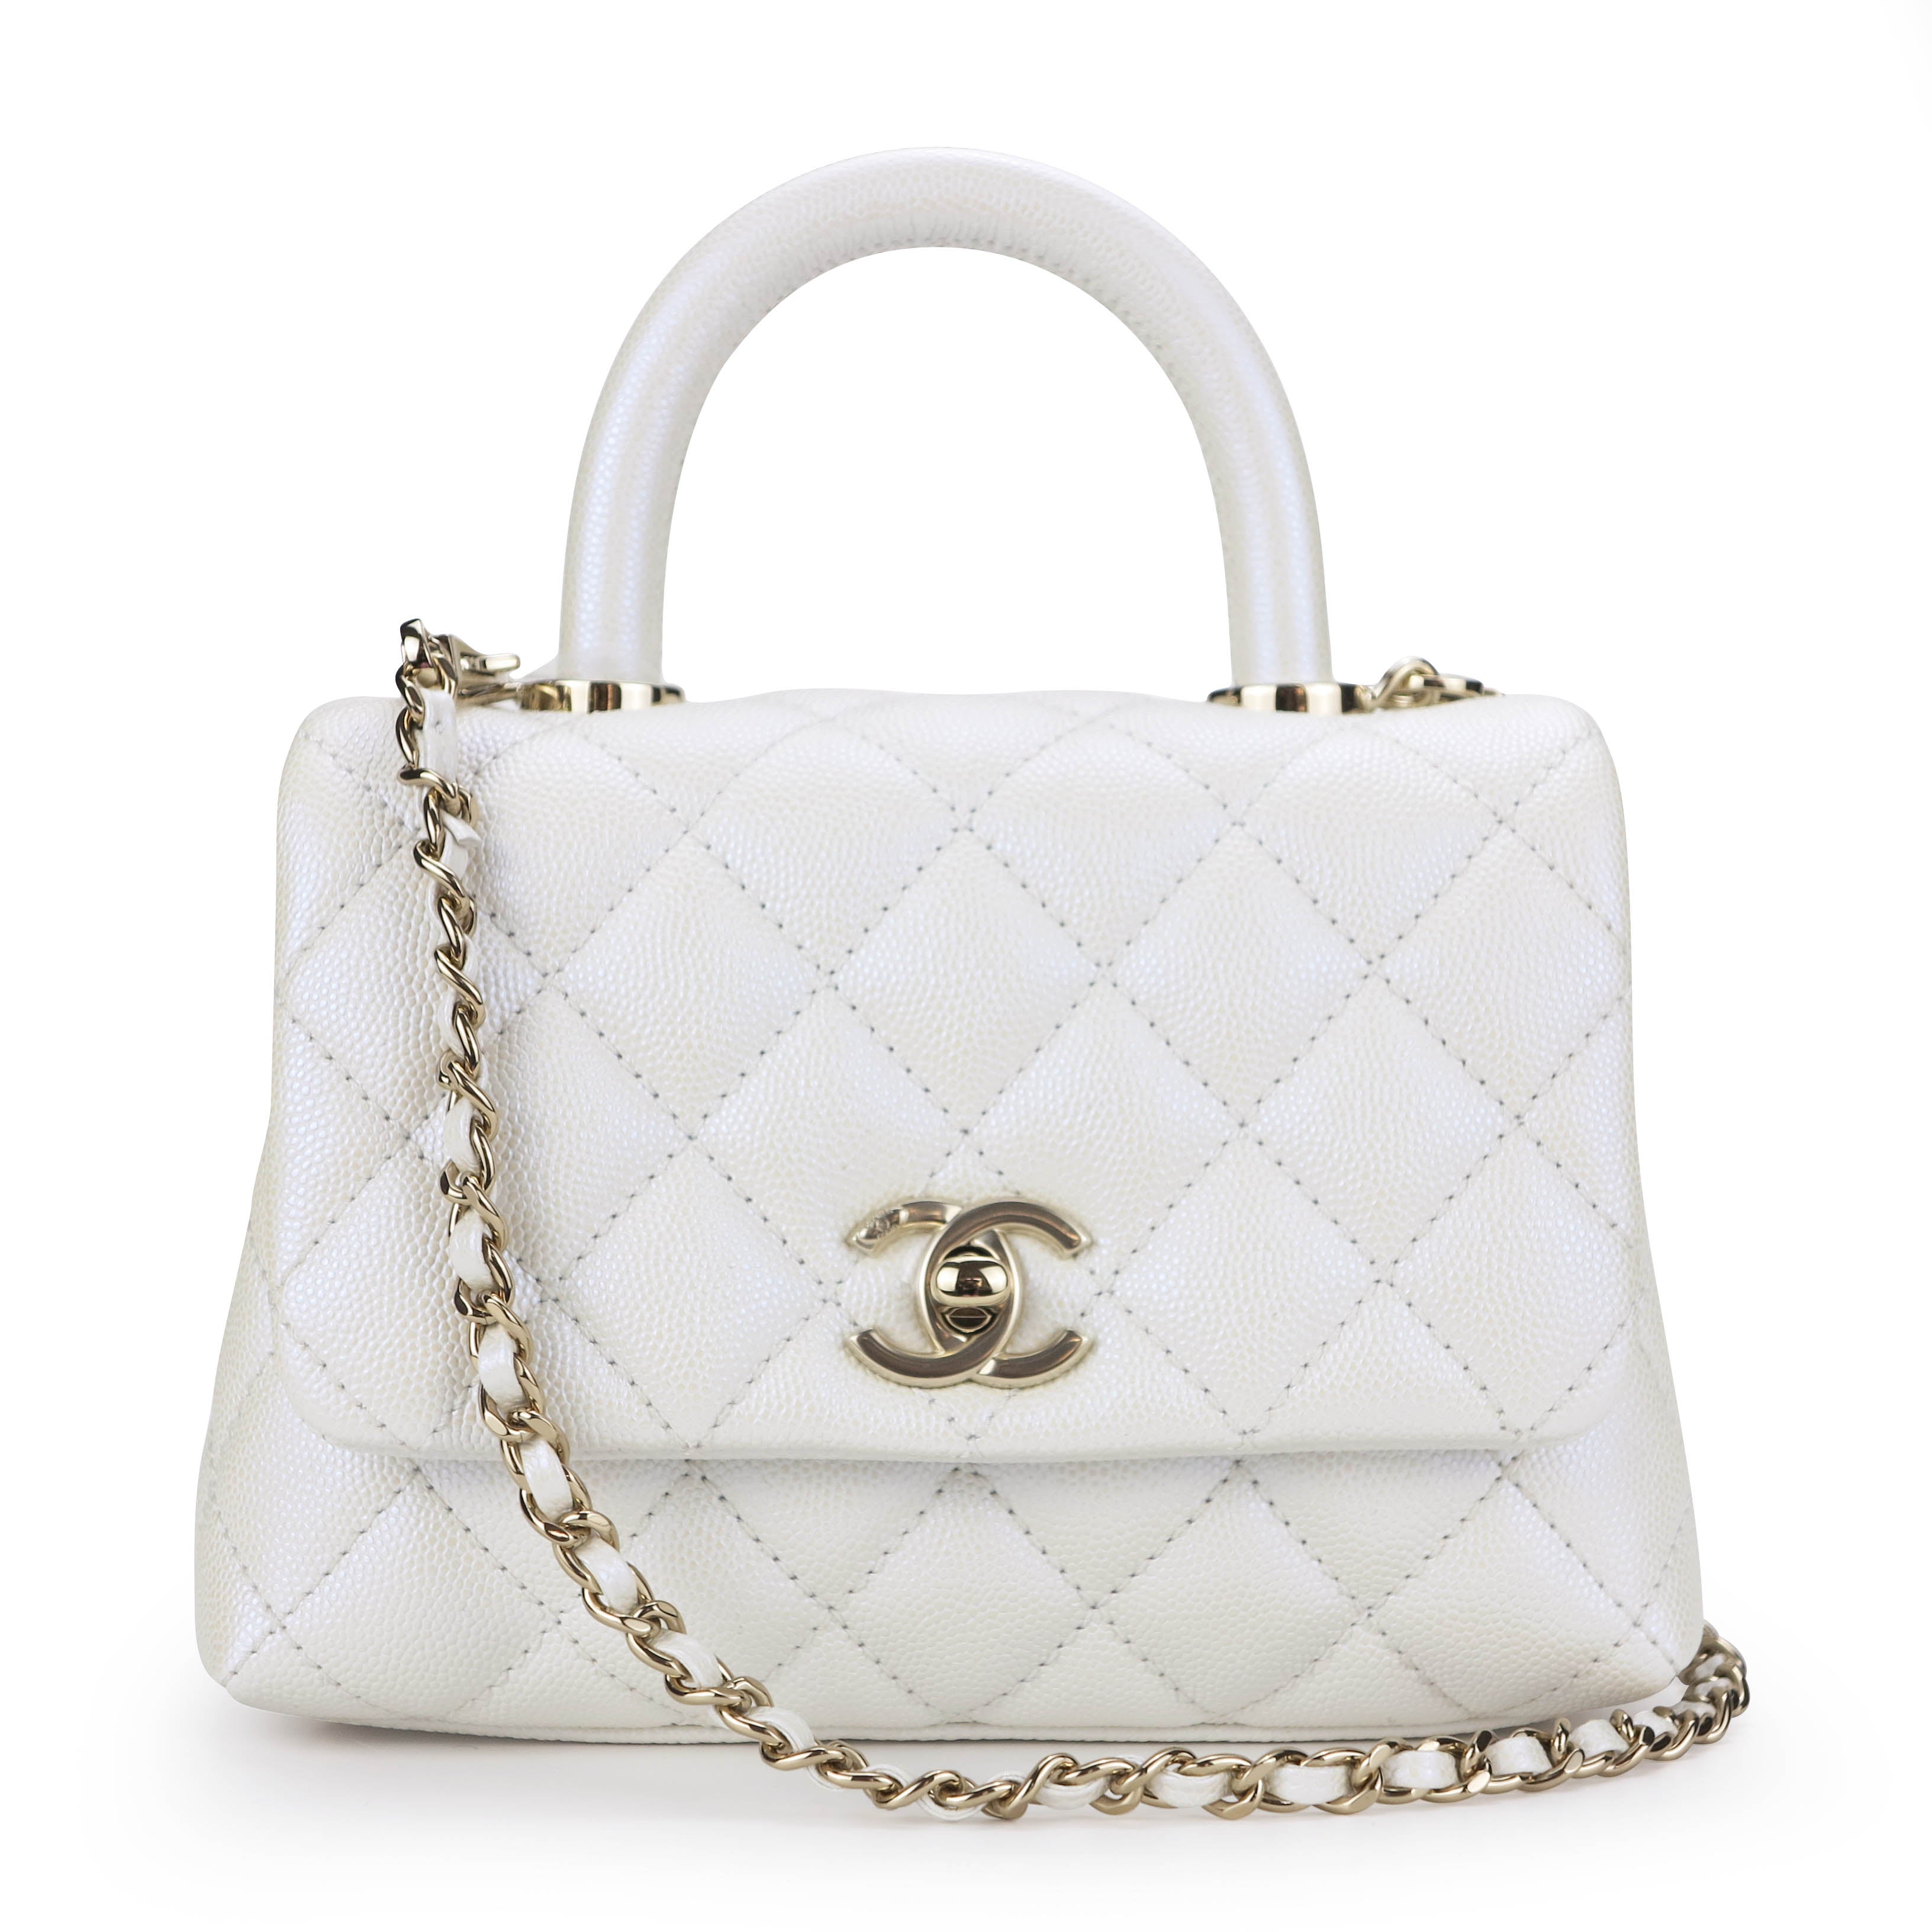 white chanel bag with handle